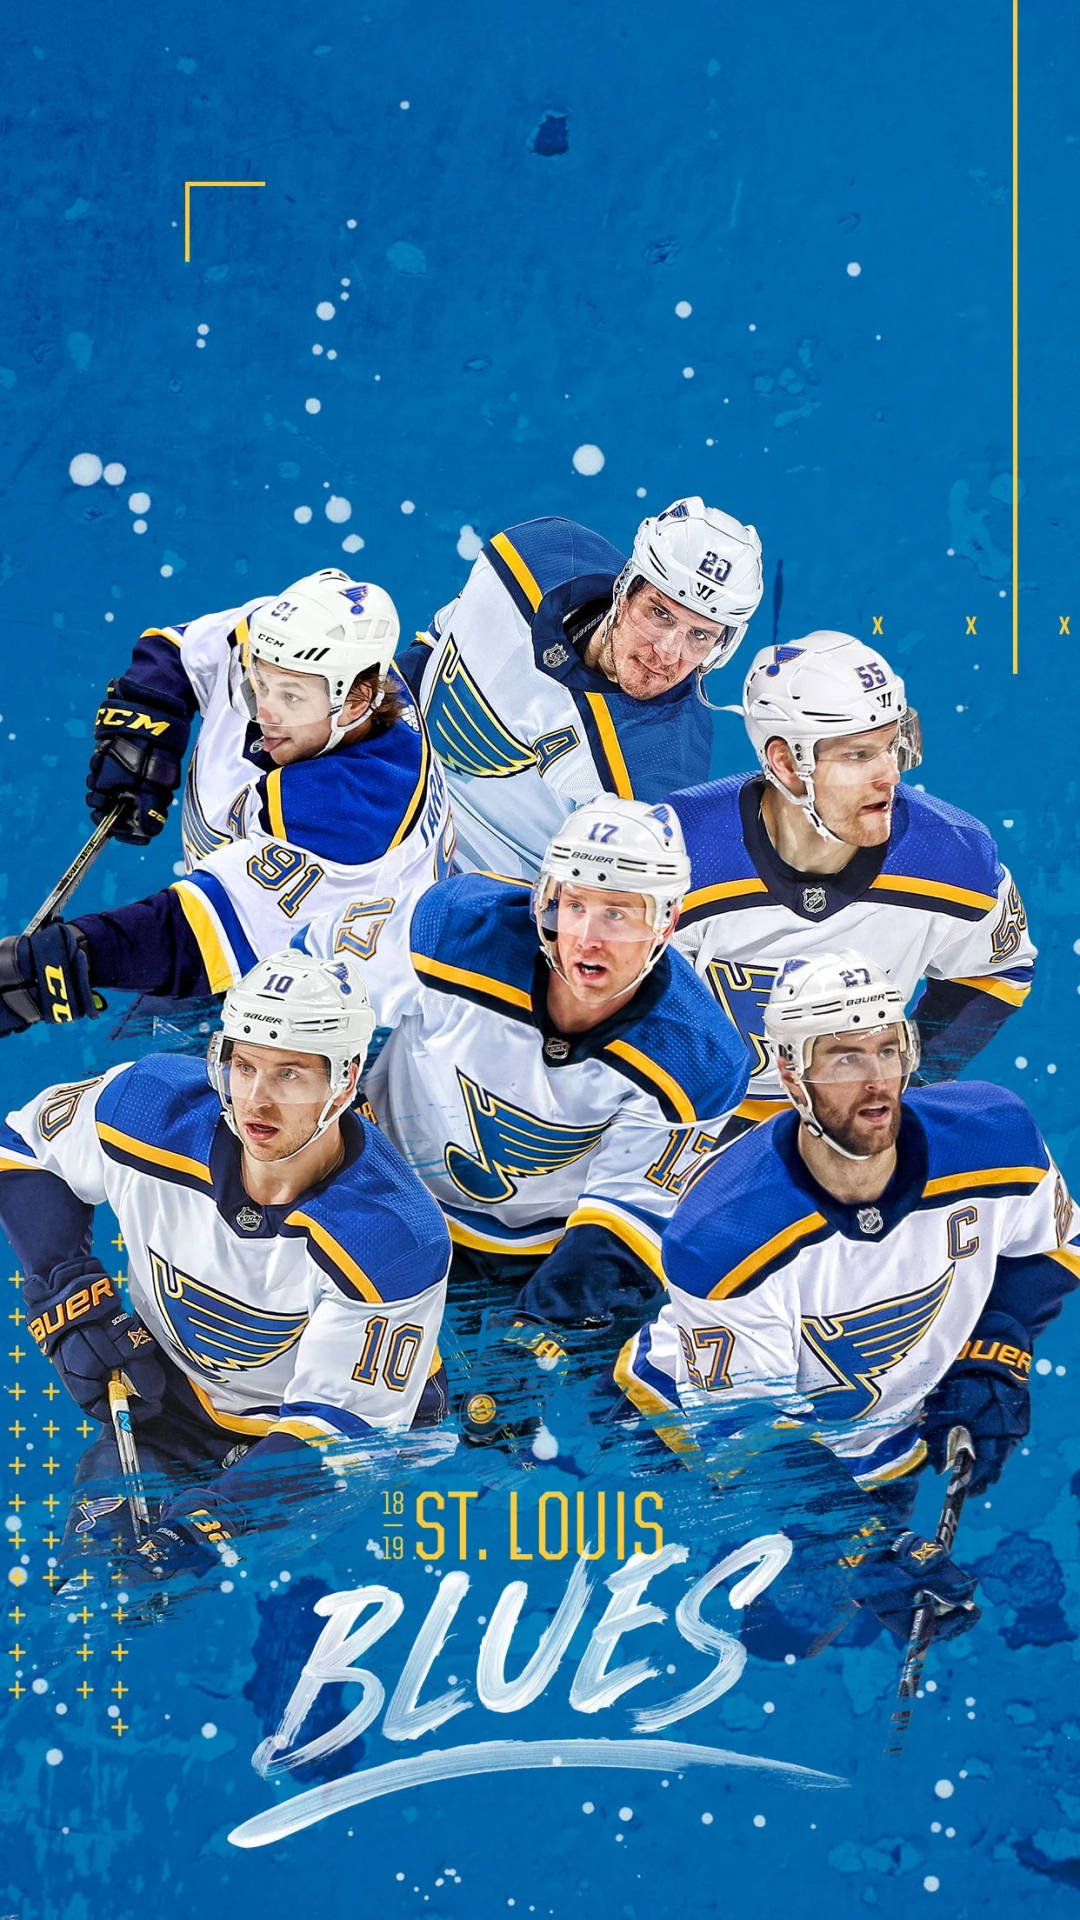 St. Louis Blues Hockey Team In Action